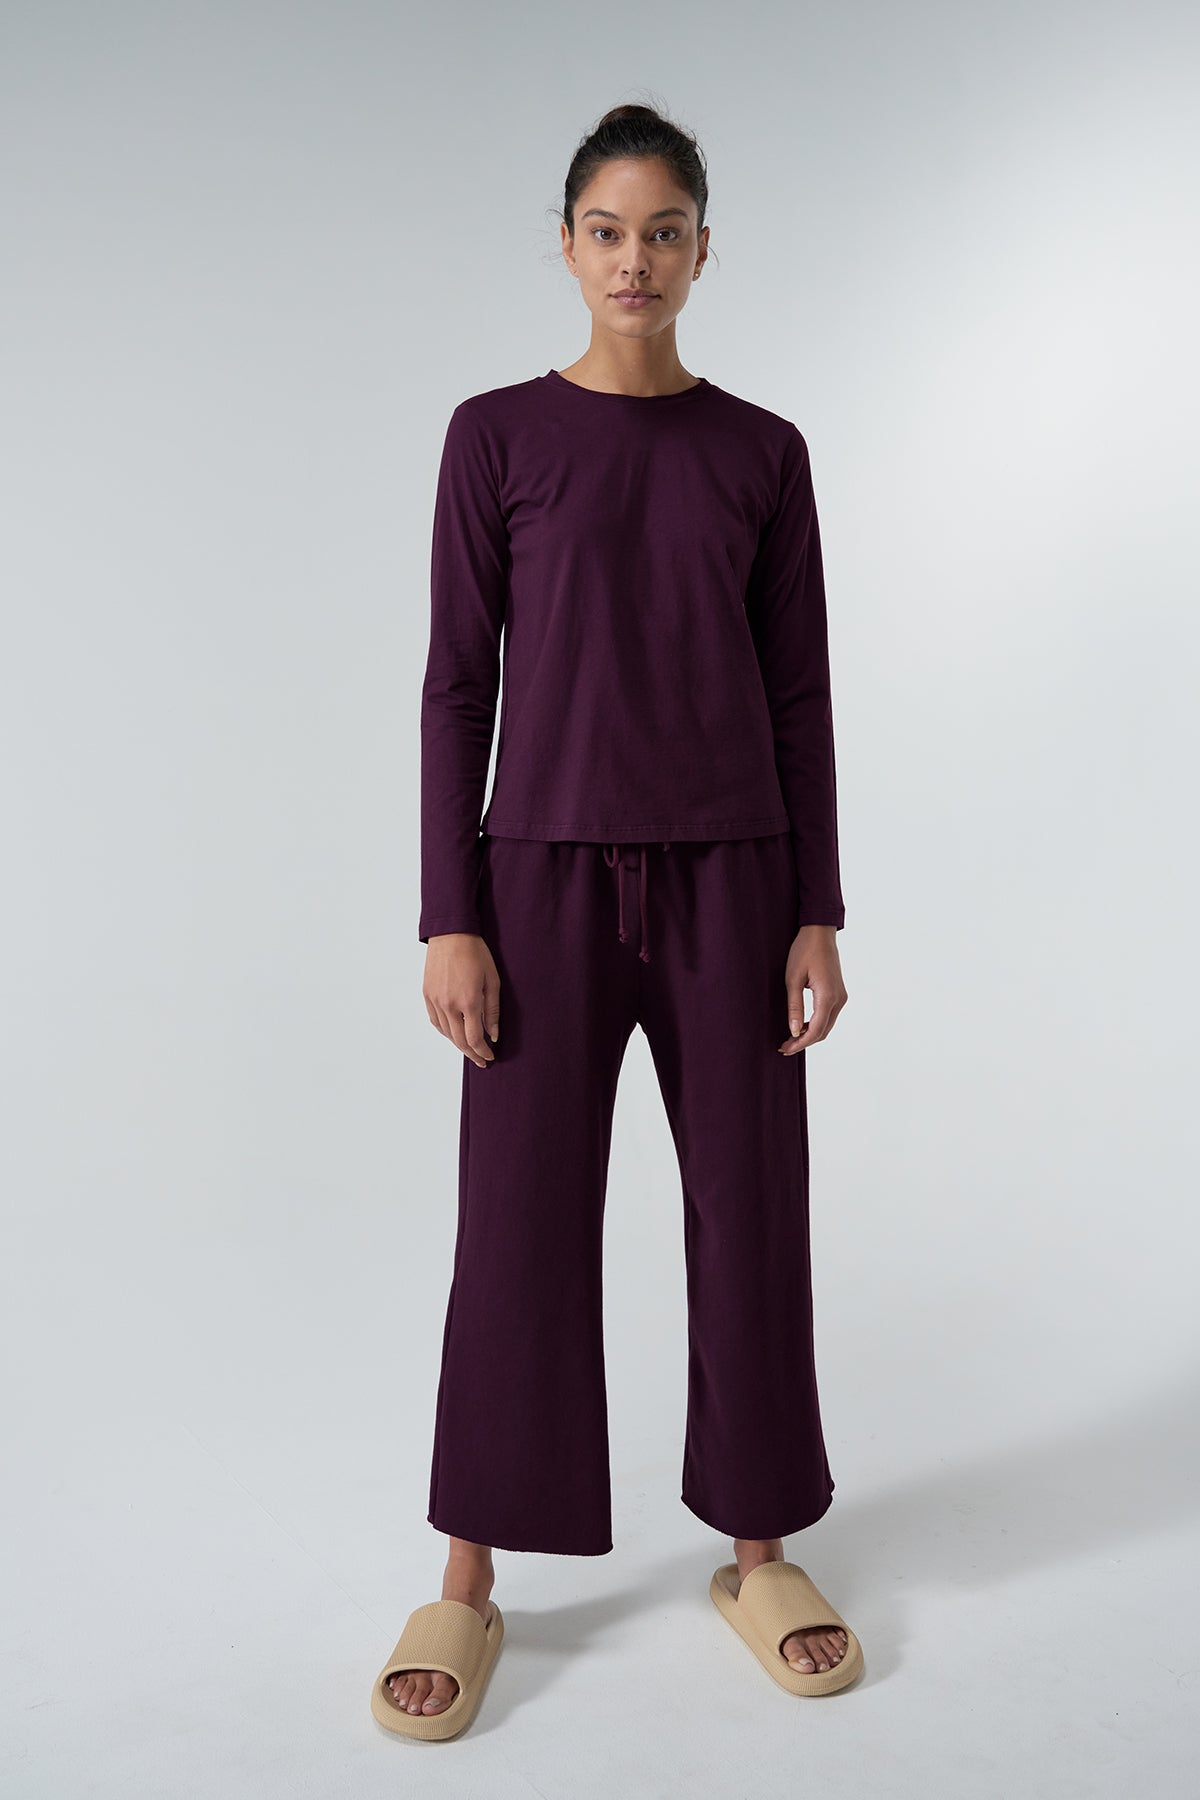 Vicente Tee Mulberry with Montecito Sweatpant Mulberry Front Full Length-24063841468609